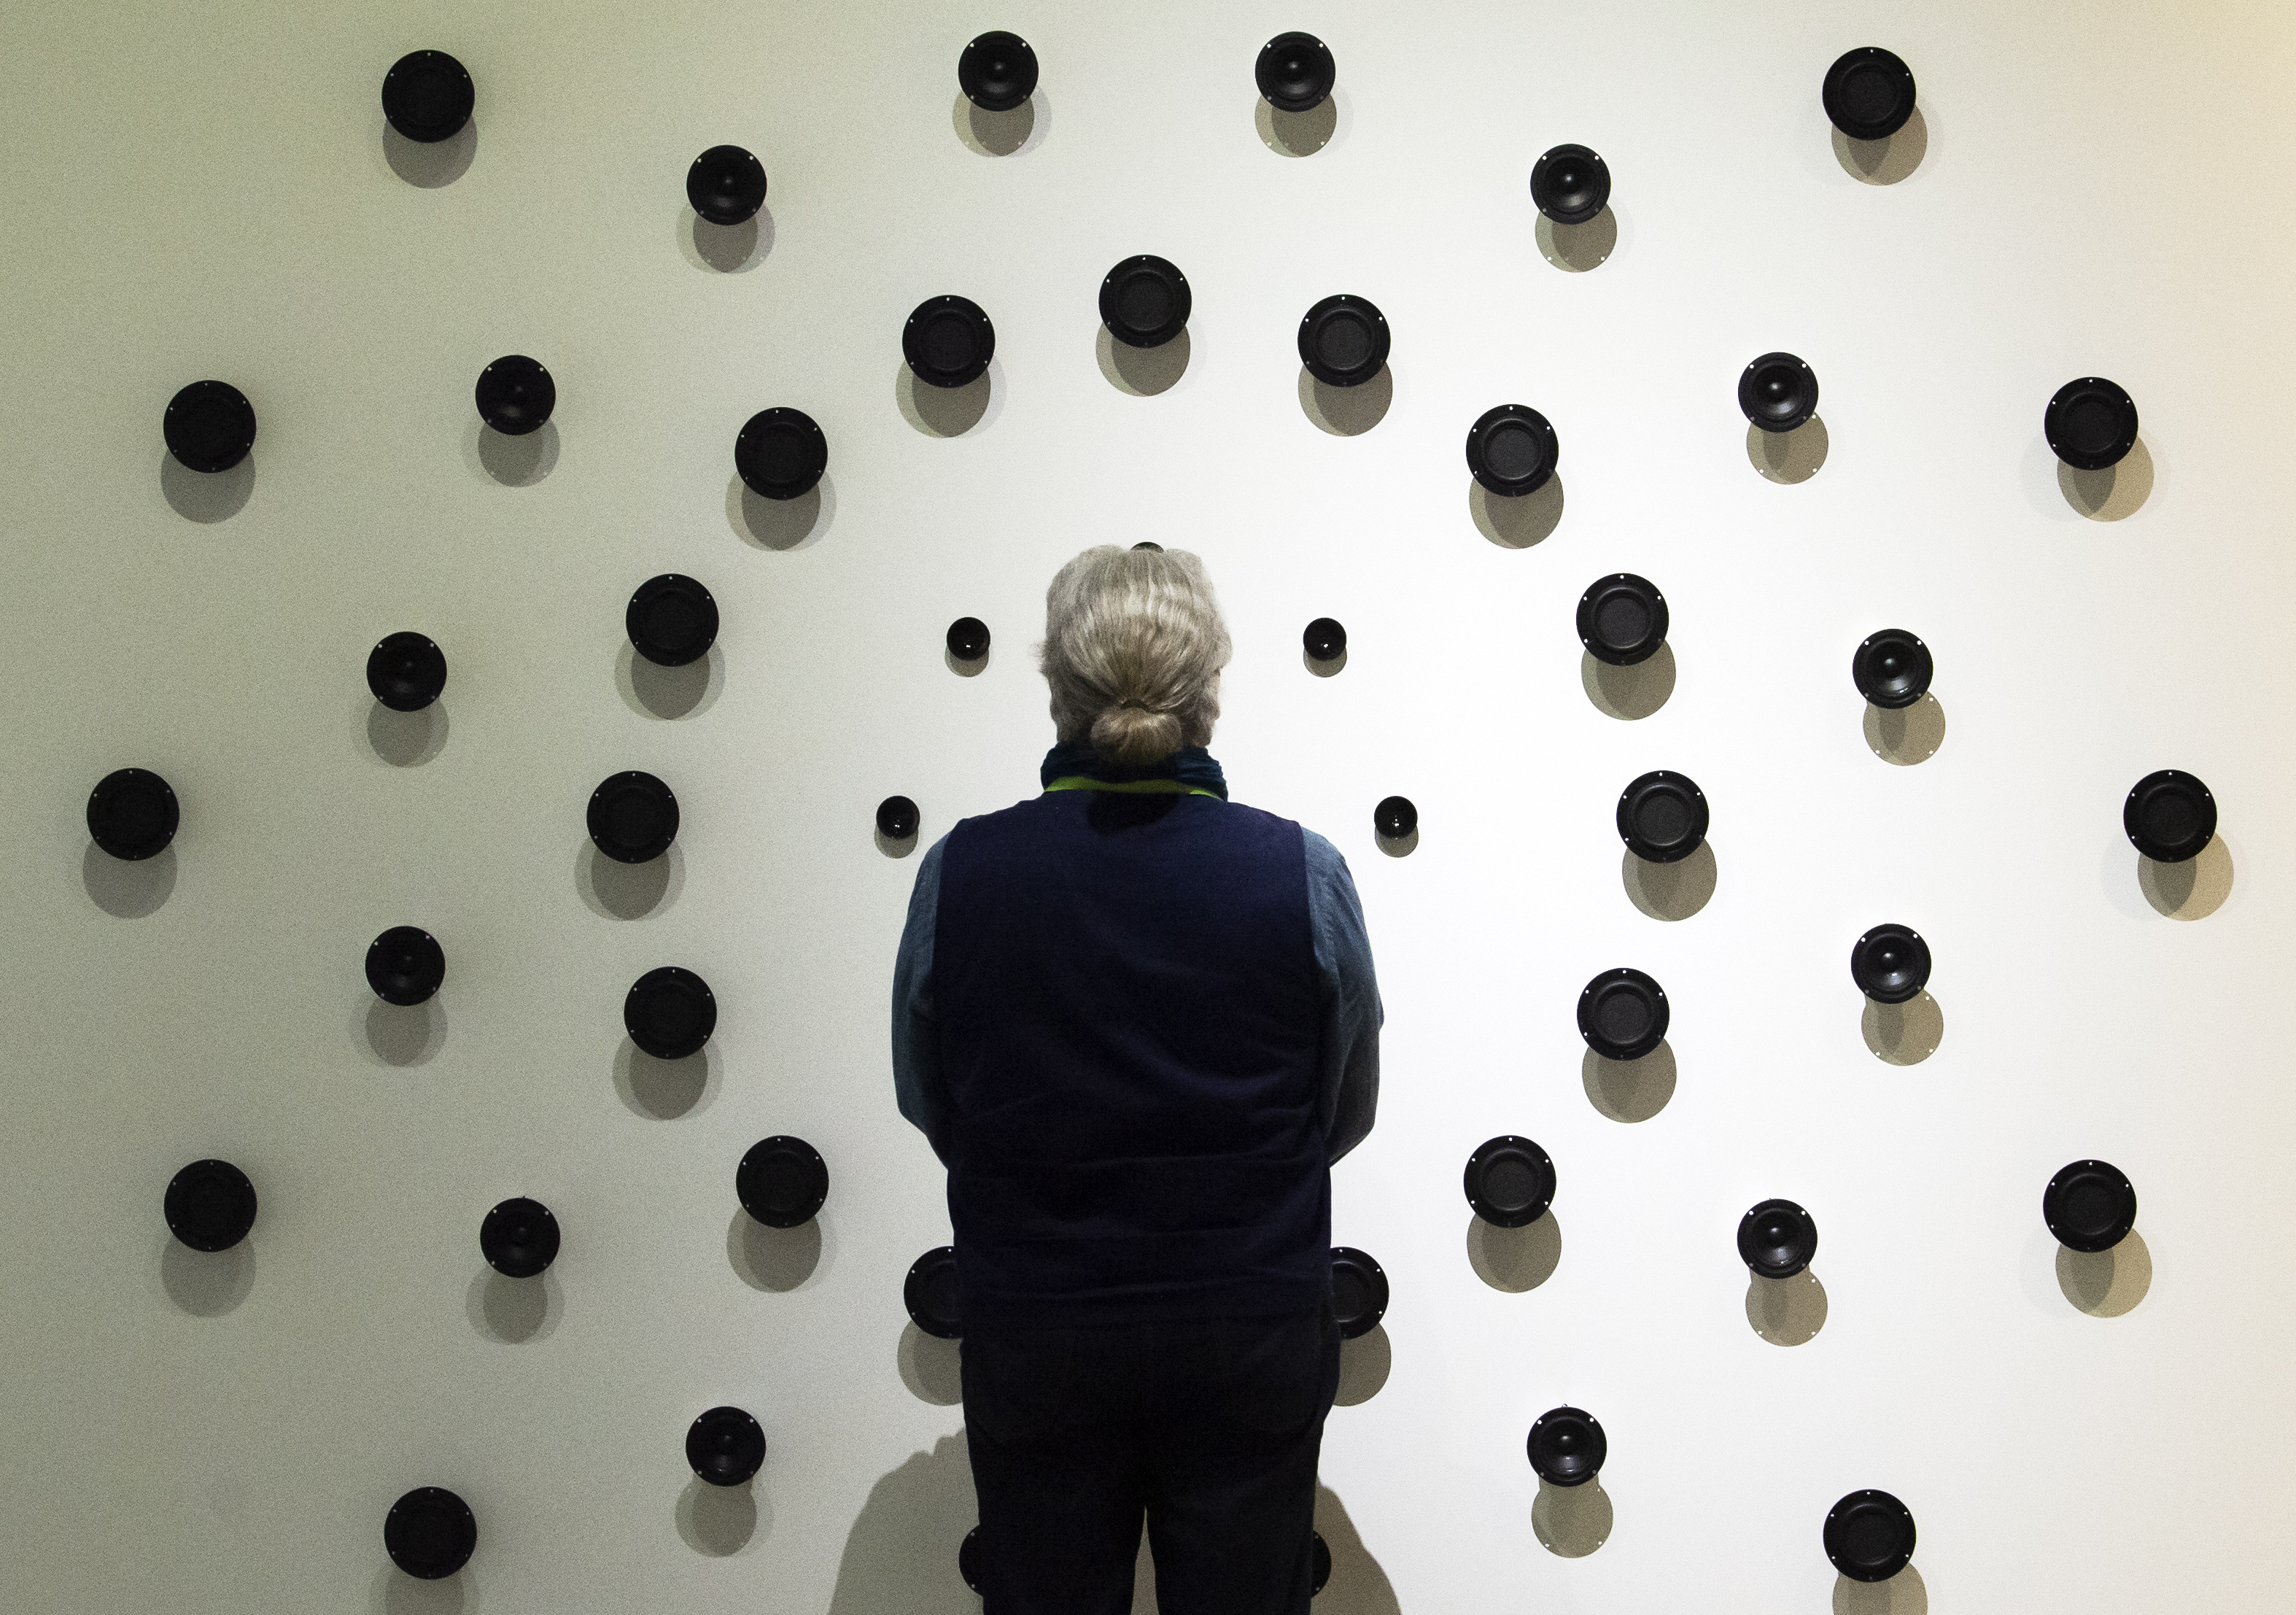 A vistor stands in front of a sound installation in one of the exhibition halls during the press preview prior to the opening of the new Bauhaus Museum of the 'Klassik Stiftung Weimar' (Classic Foundation Weimar) in Weimar, Germany, Thursday, April 4, 2019. The museum designed by Berlin-based architect Heike Hanada will focus on the early Bauhaus that was founded in Weimar in 1919 and stayed there until 1925. The official opening of the new Bauhaus Museums will take place on Friday, April 5, 2019. (AP Photo/Jens Meyer)